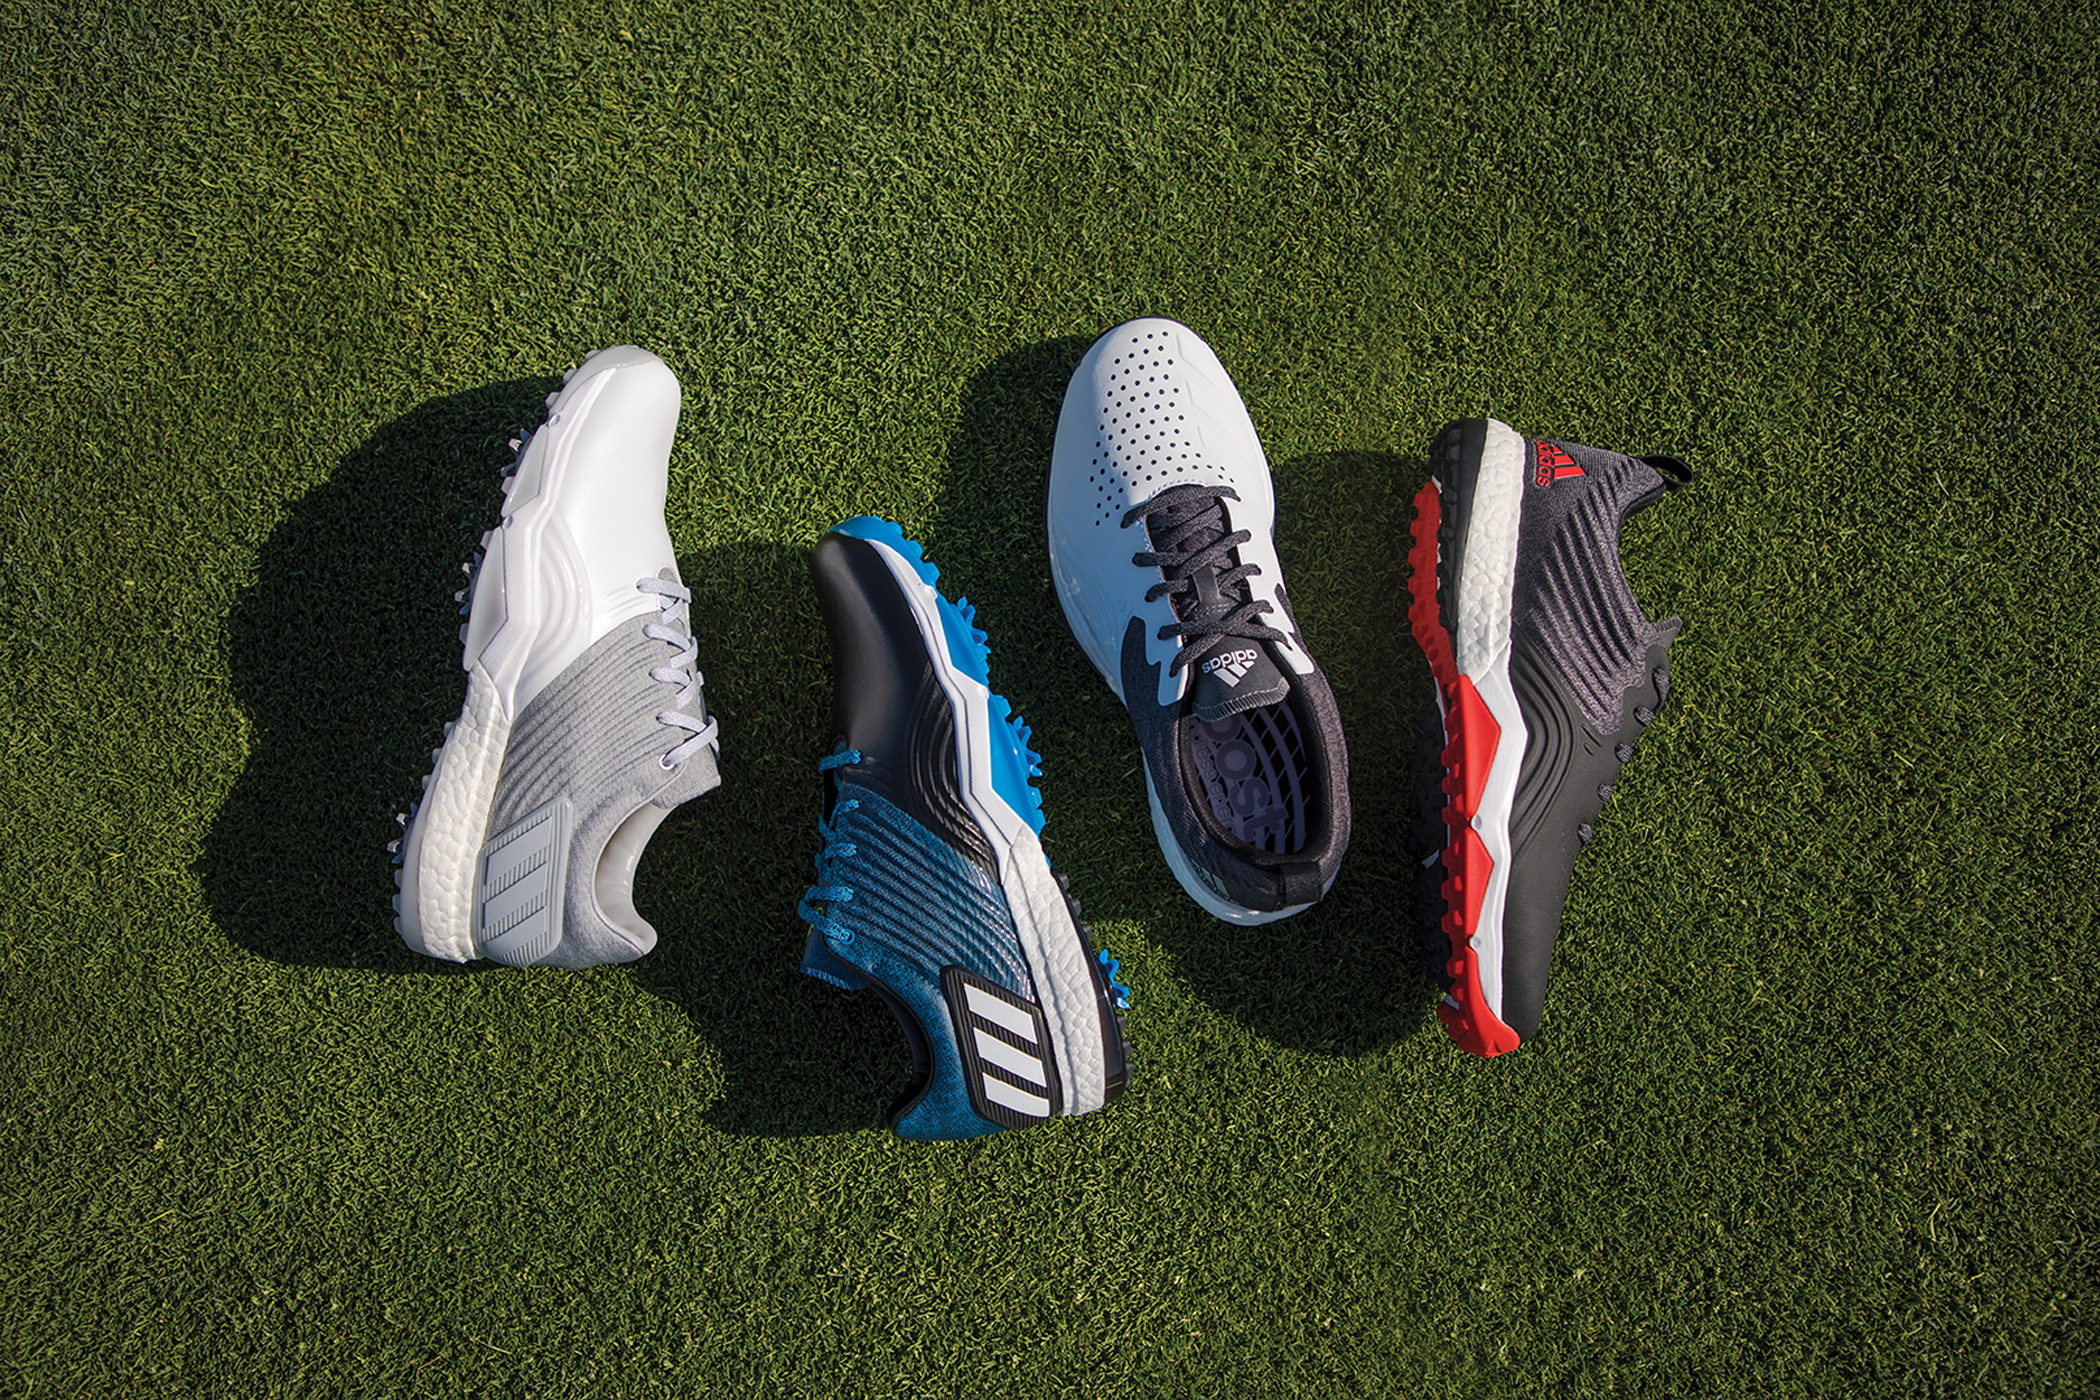 controller verkoudheid Sprong Adidas adipower's latest shoe uses new process to meld lightness with  stability | Golf Equipment: Clubs, Balls, Bags | Golf Digest